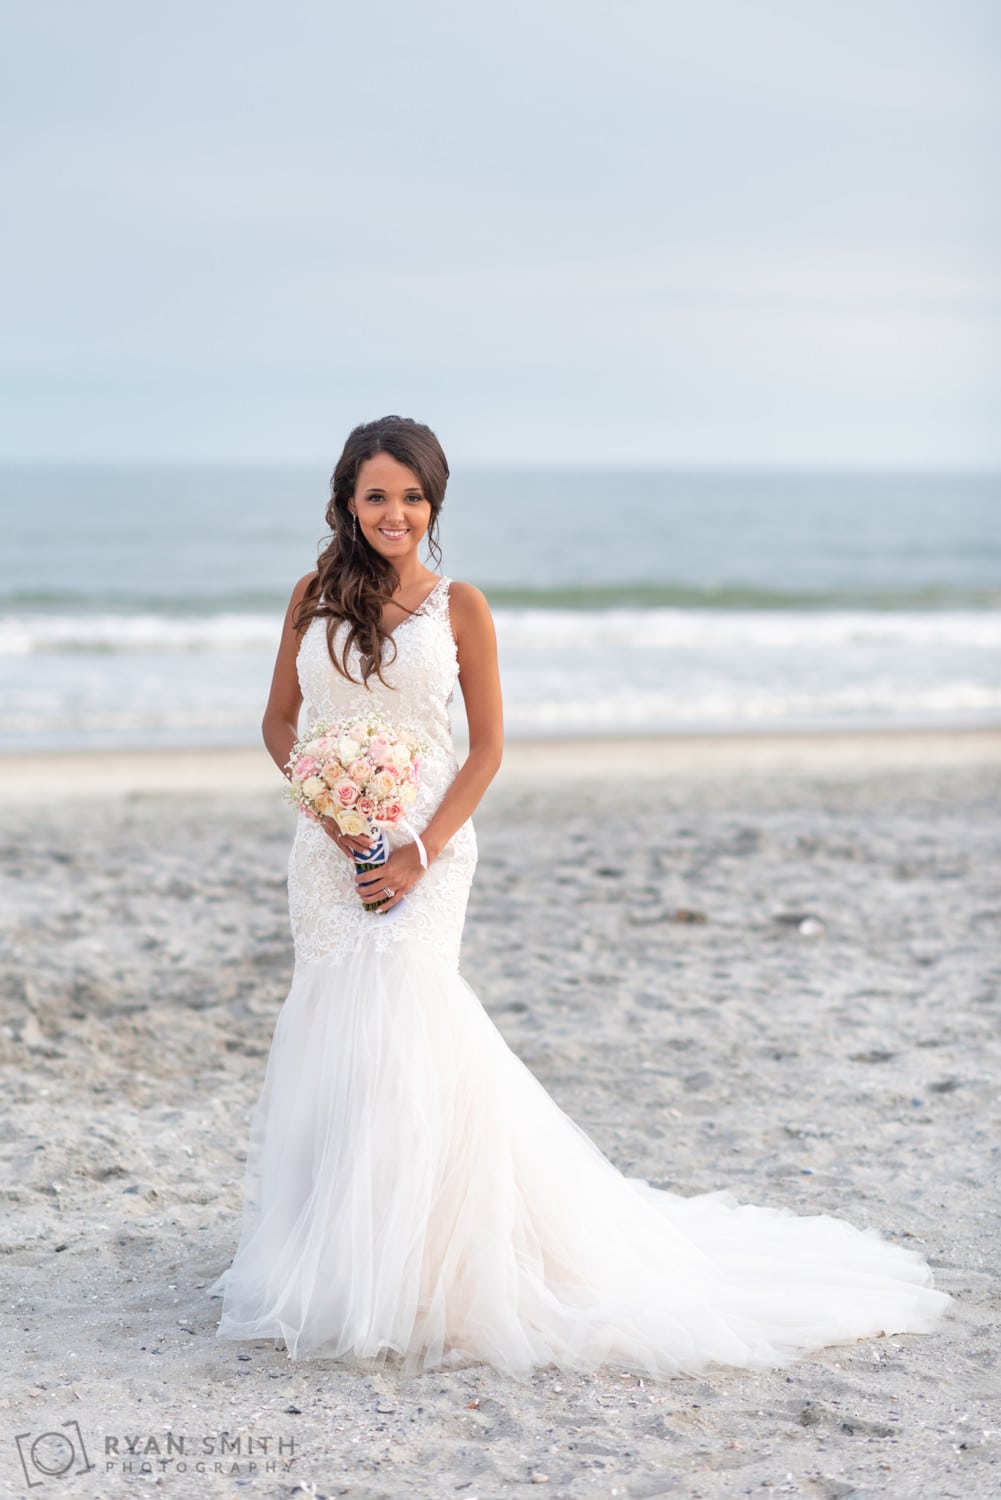 Portraits of the bride after the ceremony - Avista Resort - North Myrtle Beach